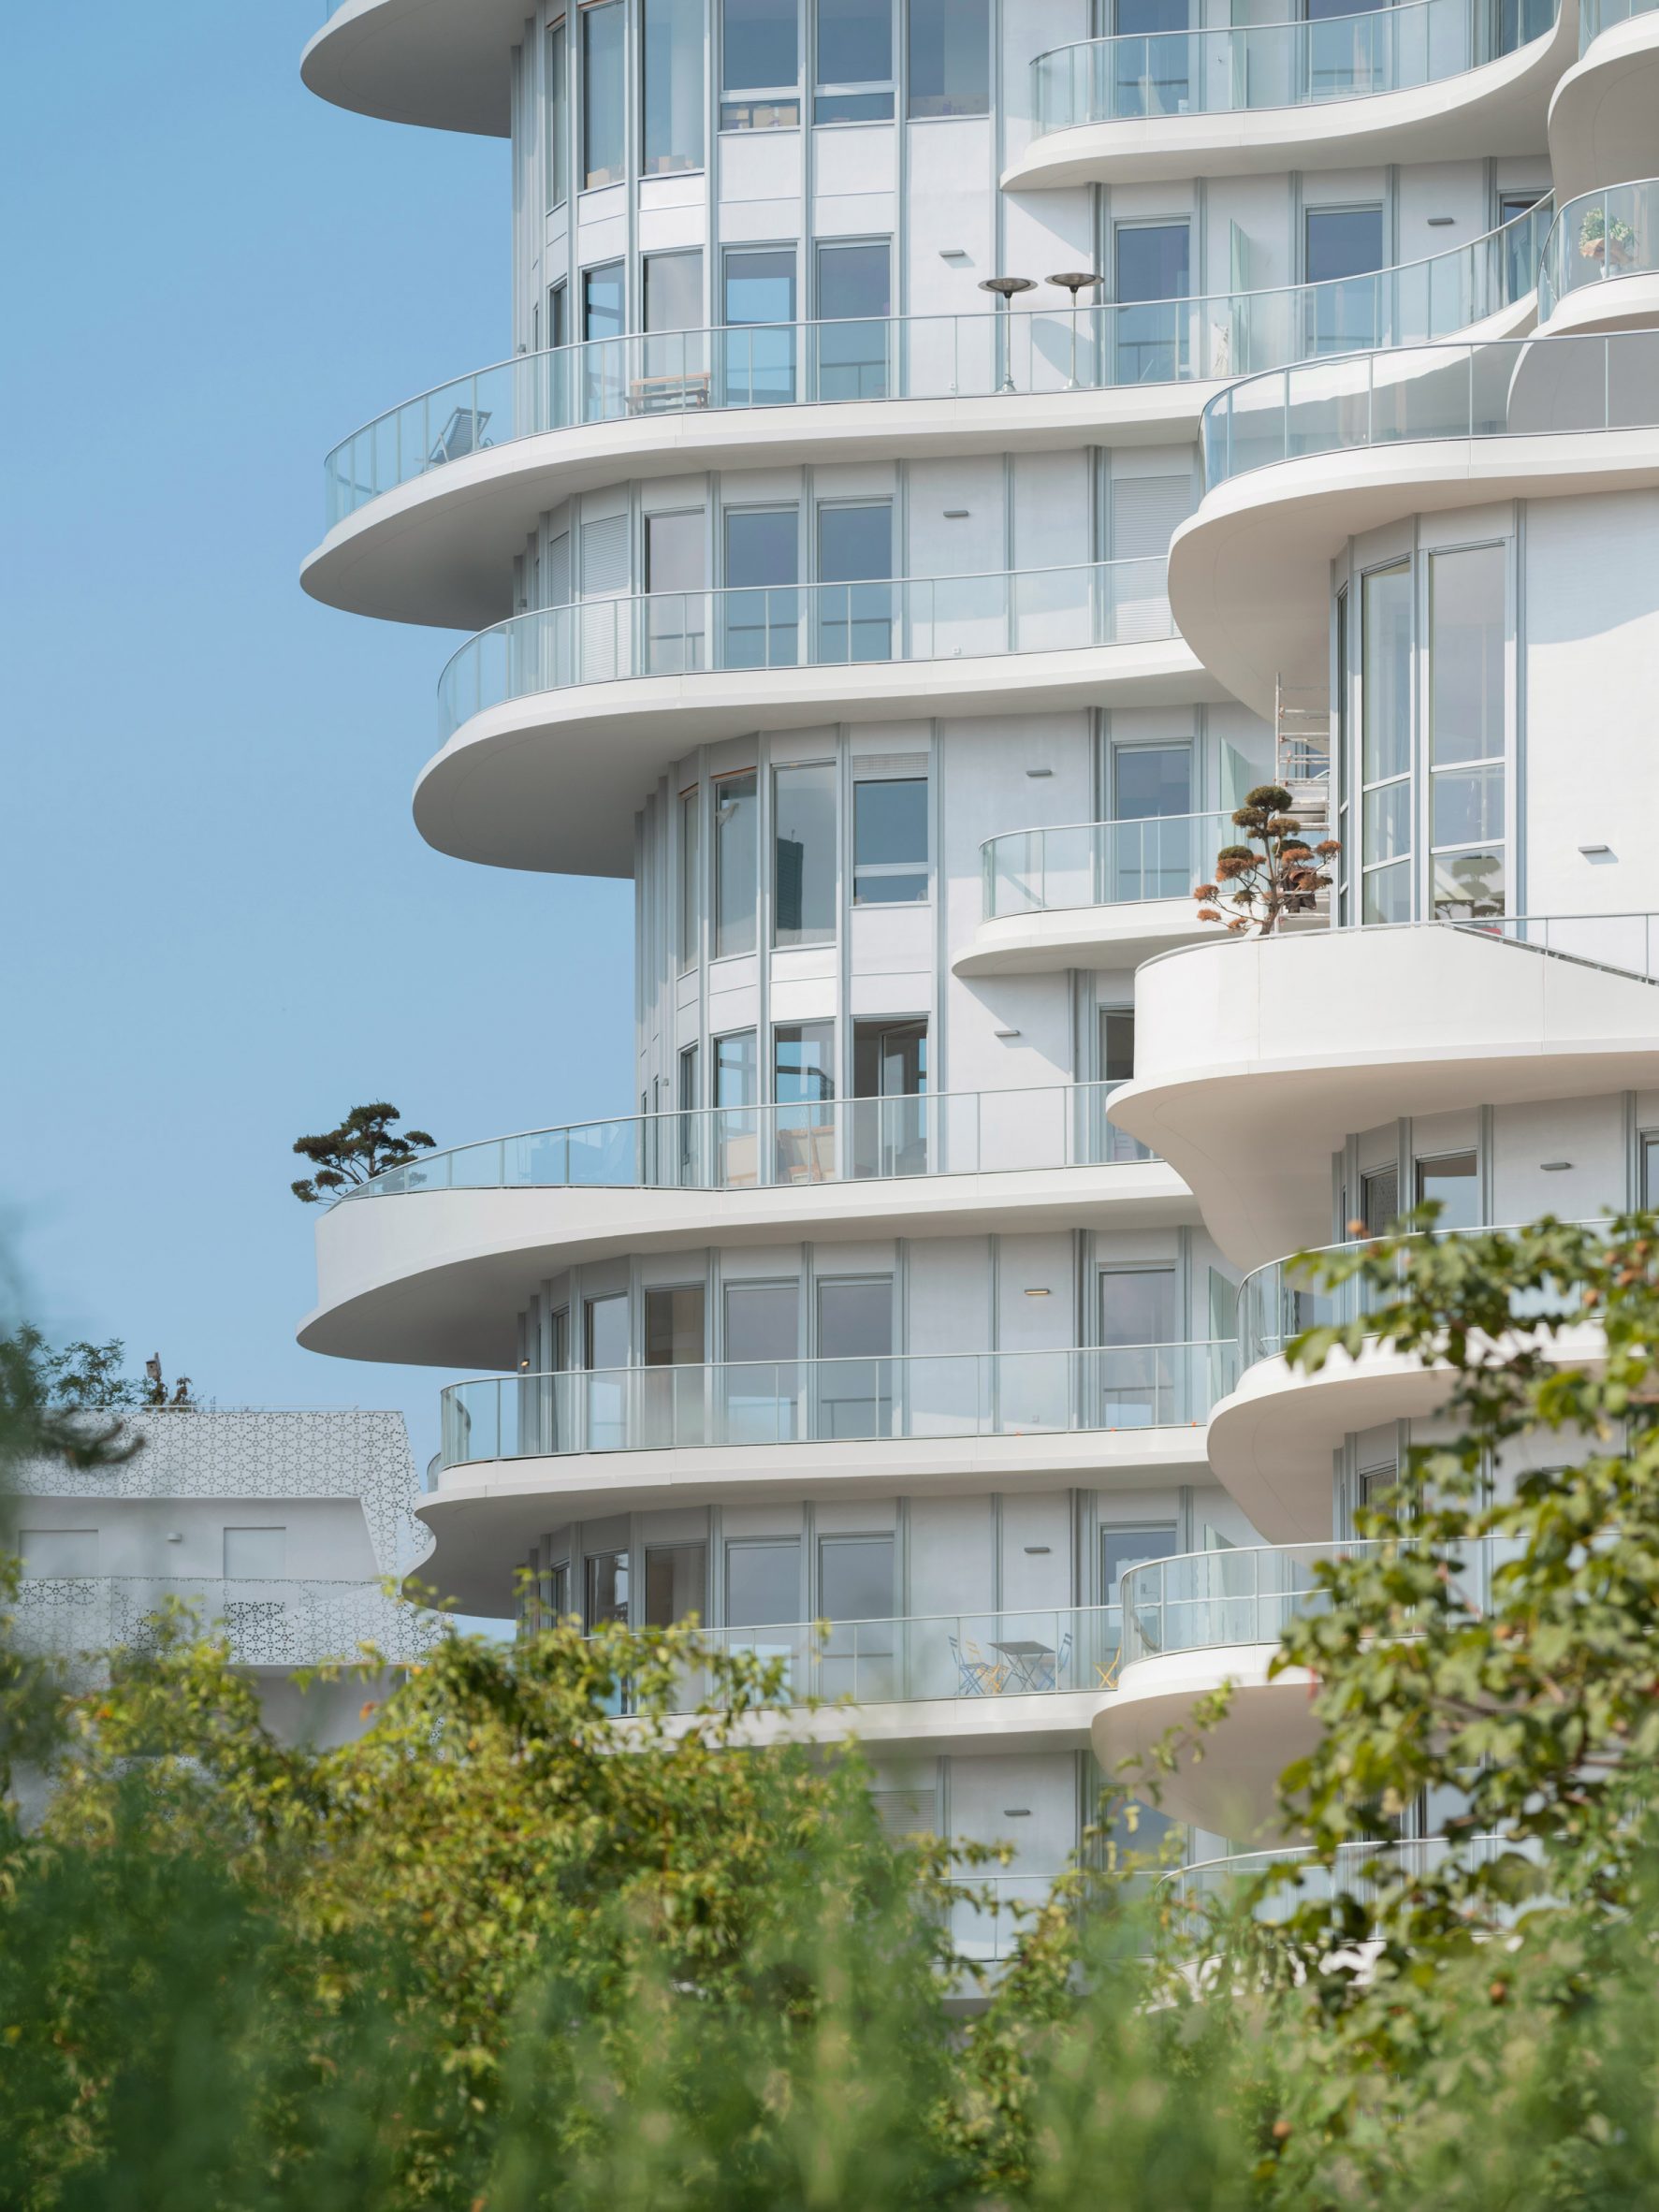 Curved white balconies on Paris housing